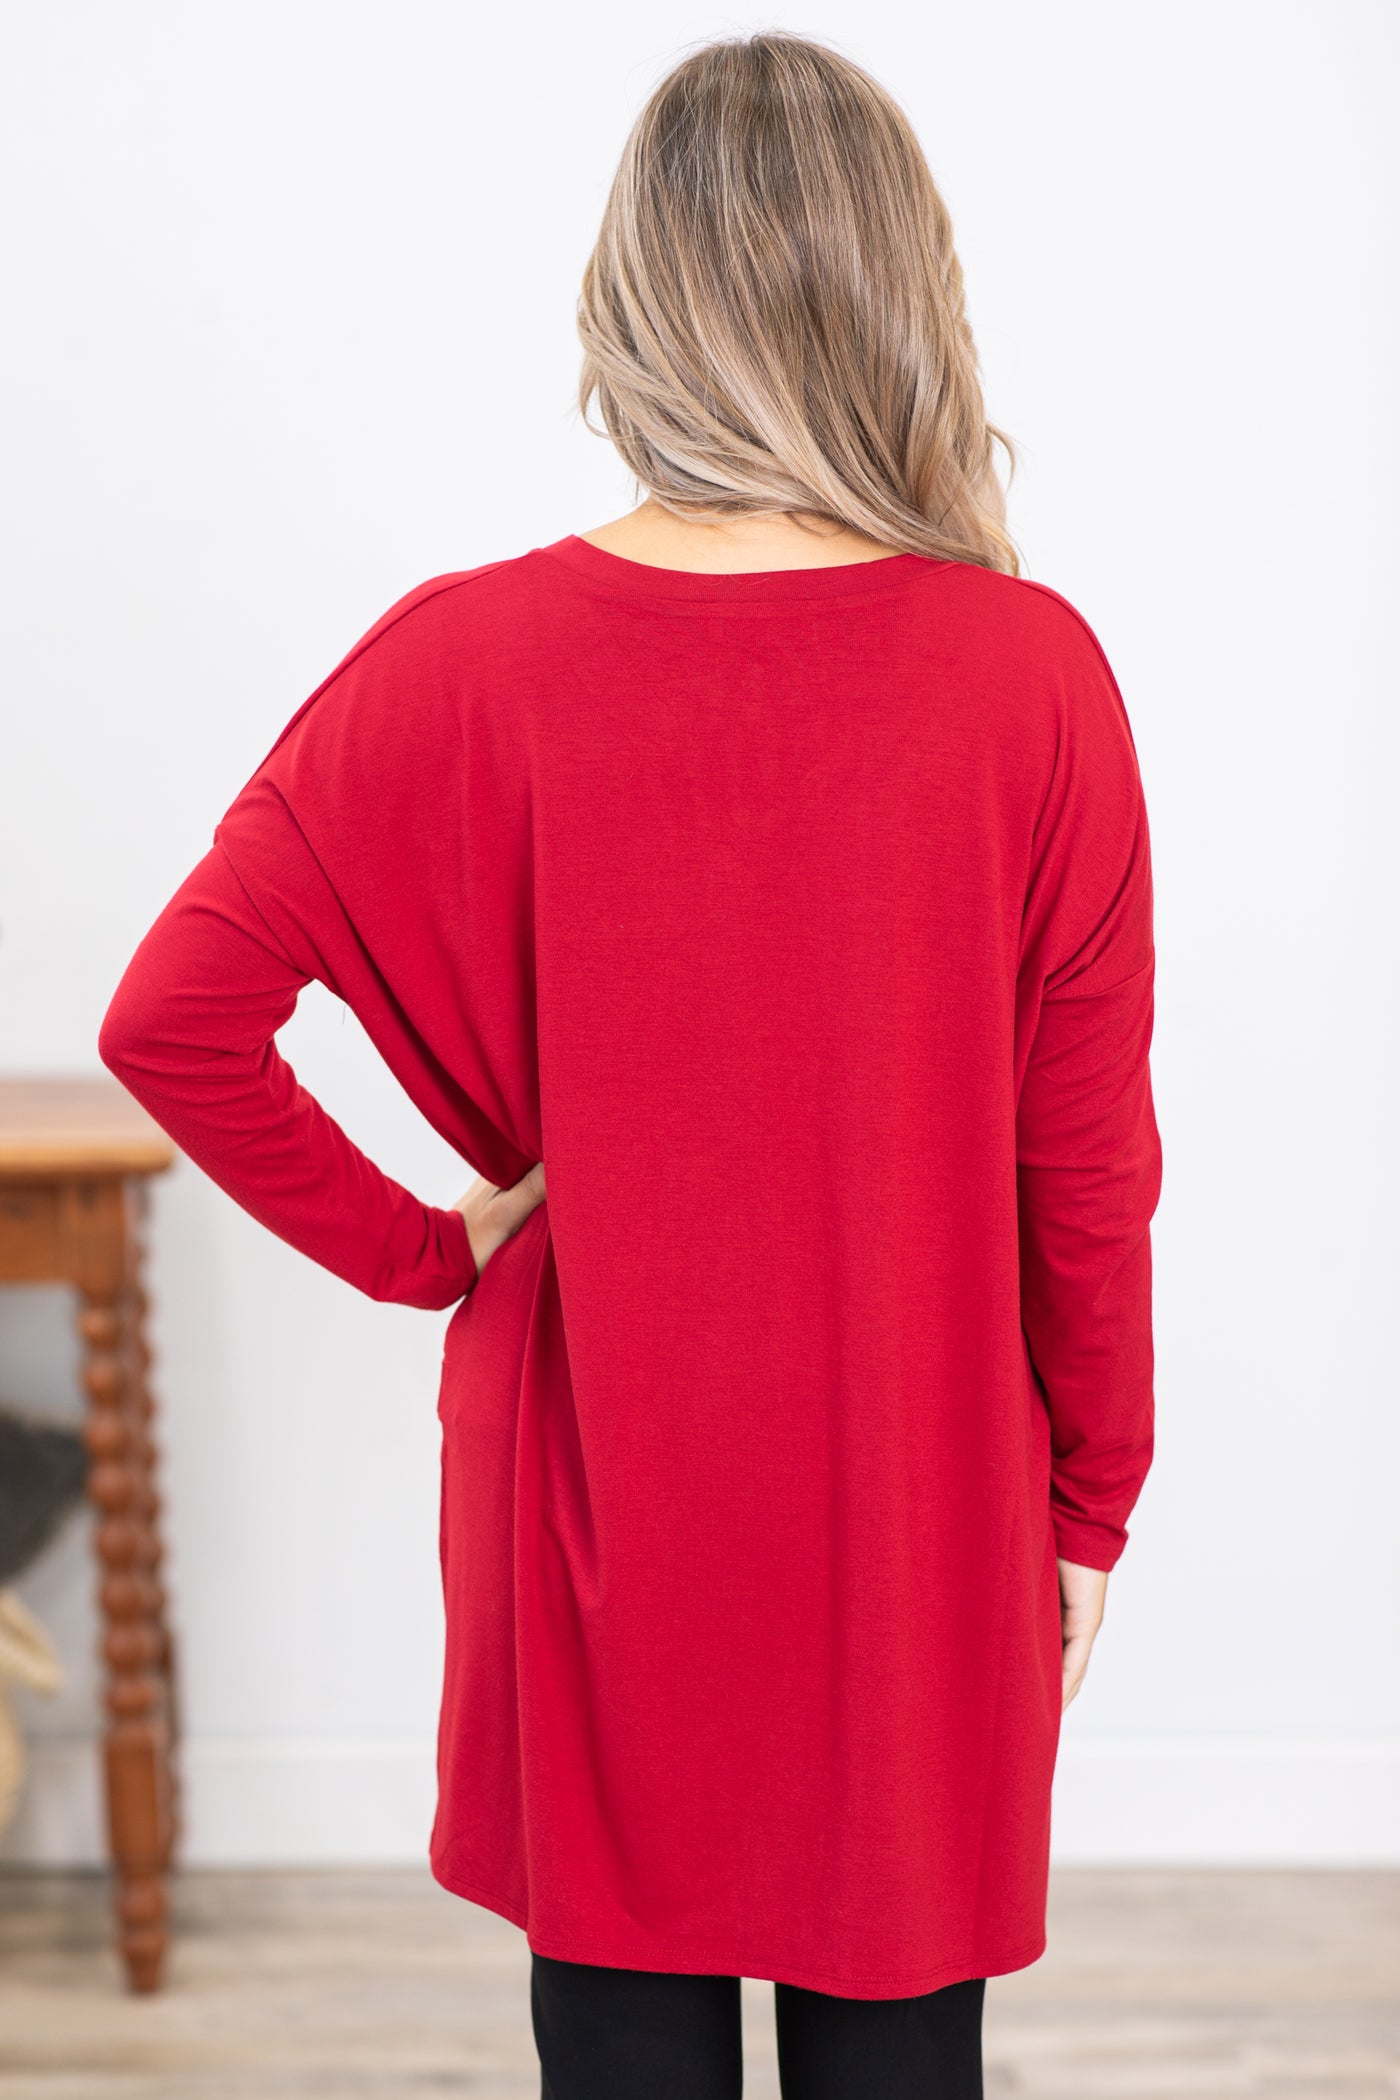 Red Long Sleeve Top With Side Slits